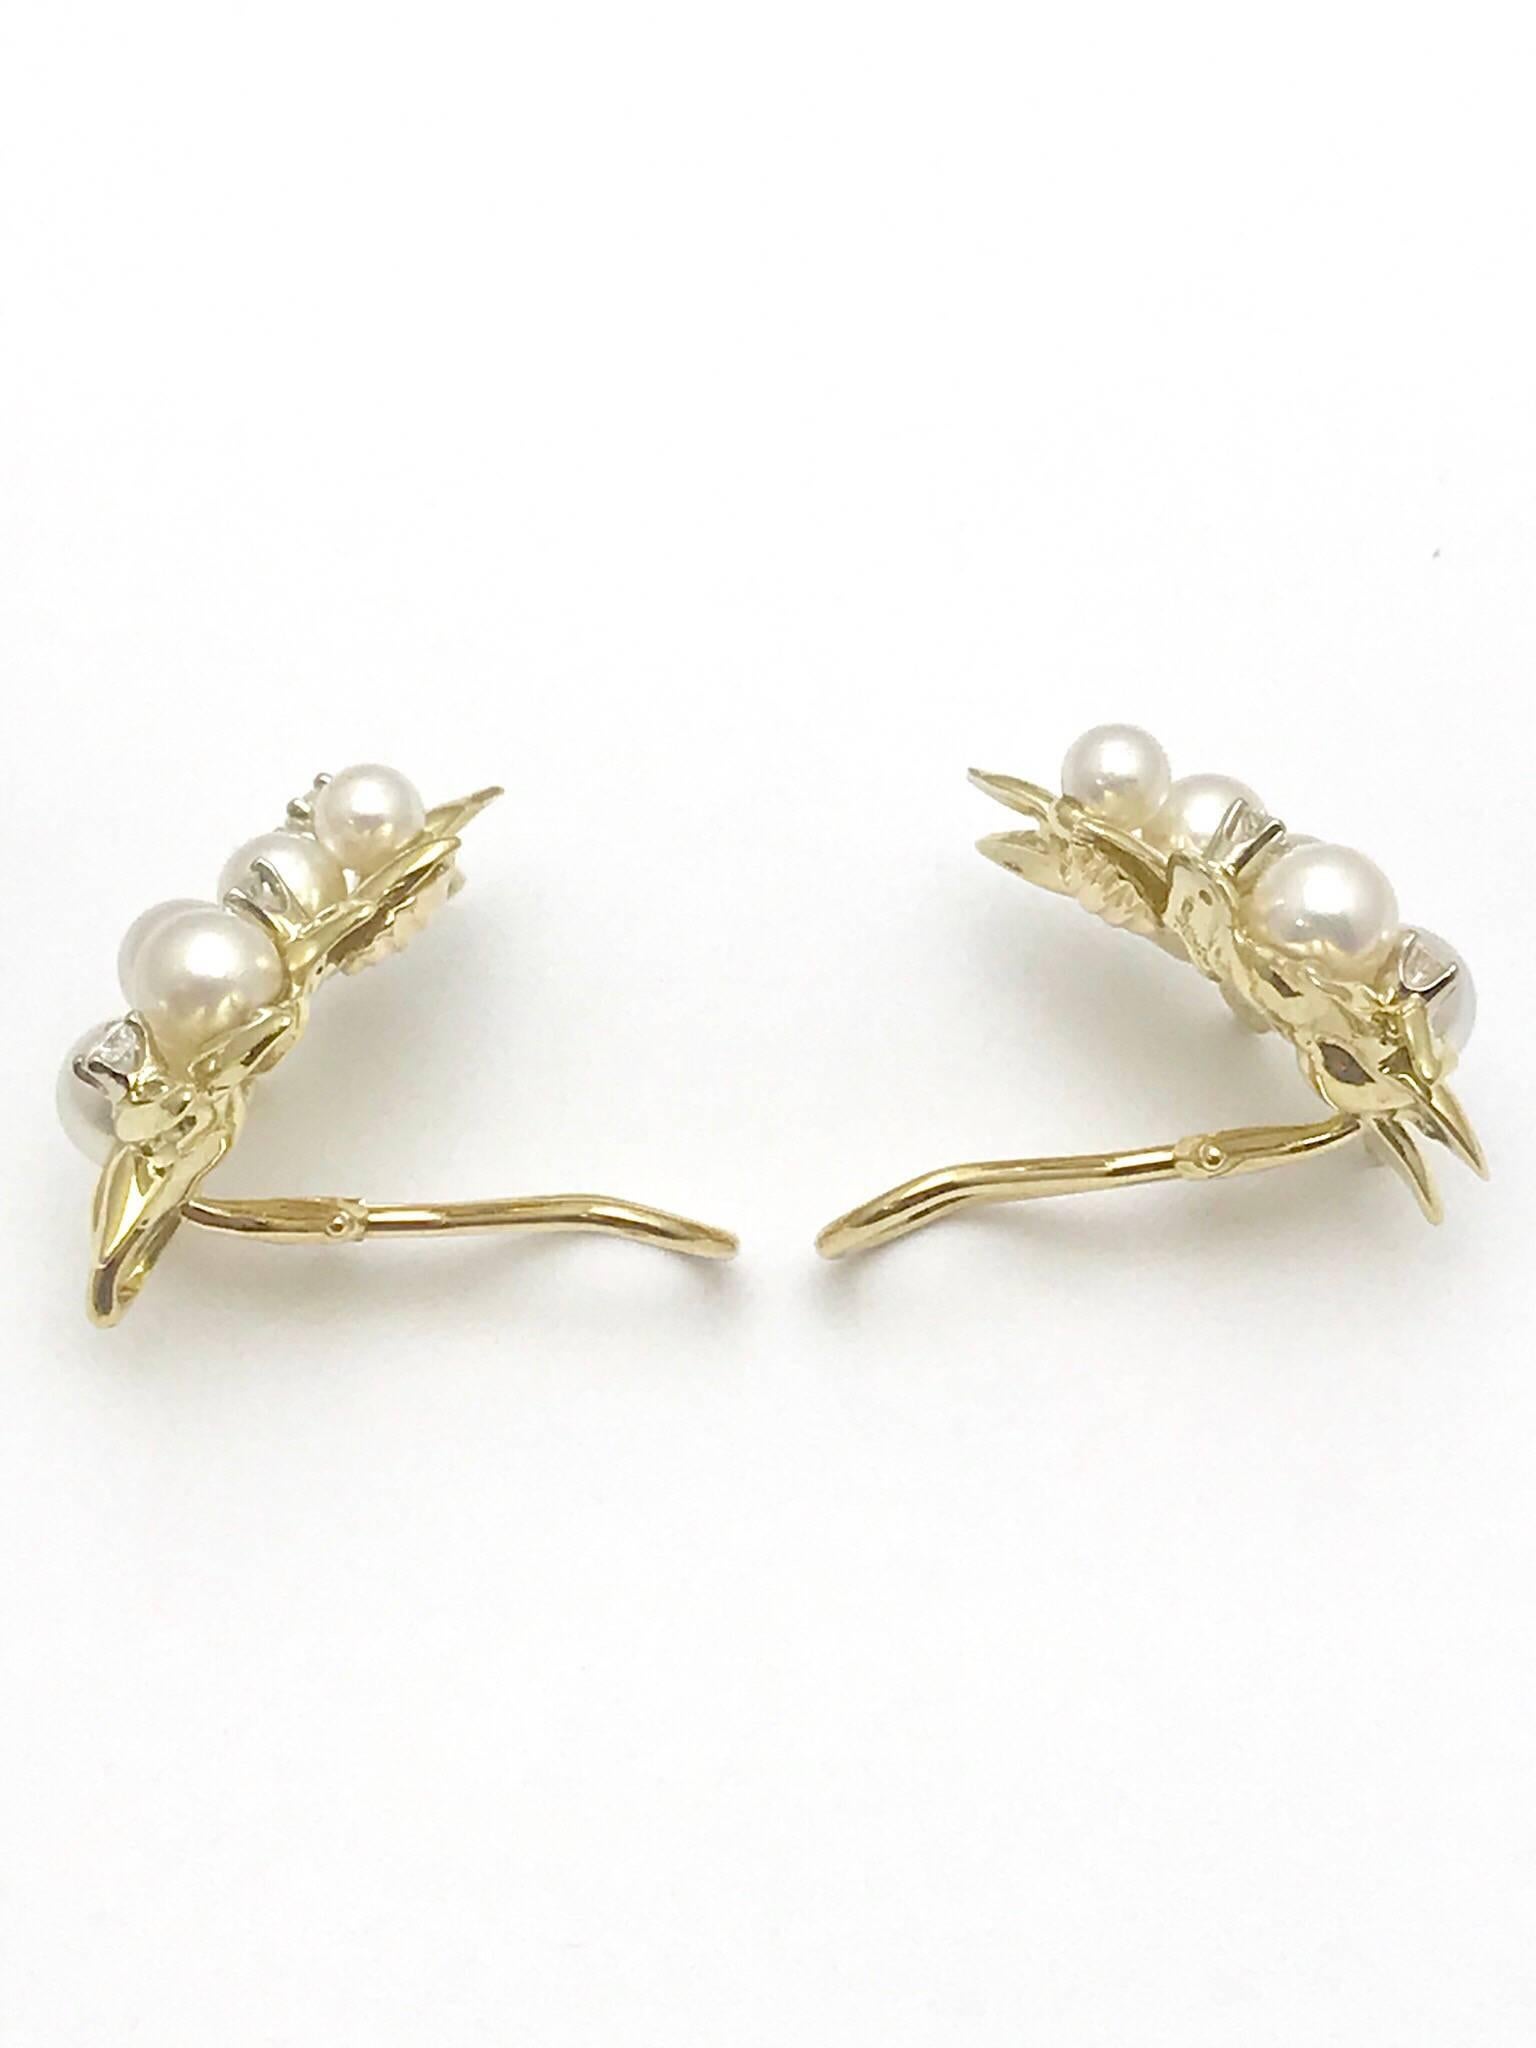 A pair of Tiffany & Co. pearl and diamond 18 karat yellow gold leaf clip earrings.  There are five pearls on each earring of varying sizes, with four round brilliant diamonds on each as well.  The eight diamonds have a total carat weight of 0.54,